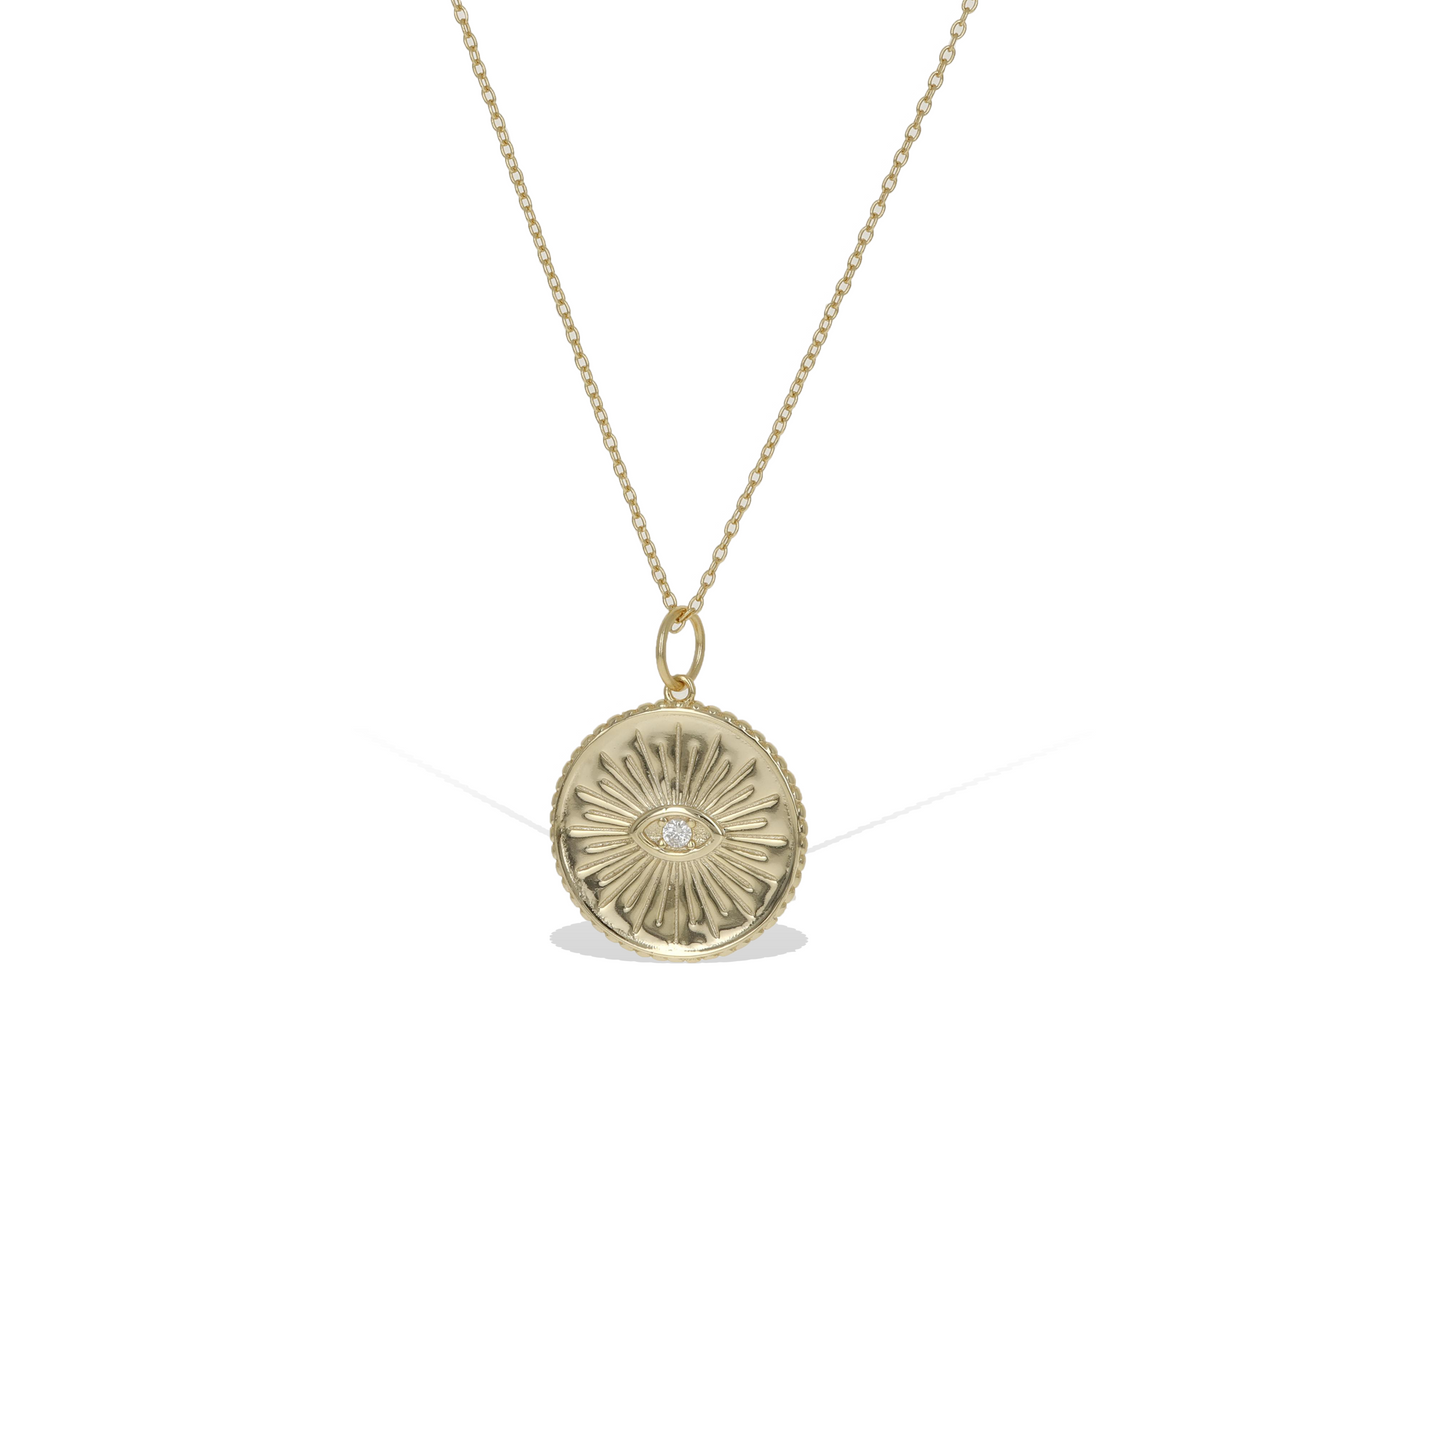 Wise Evil Eye Coin Necklace